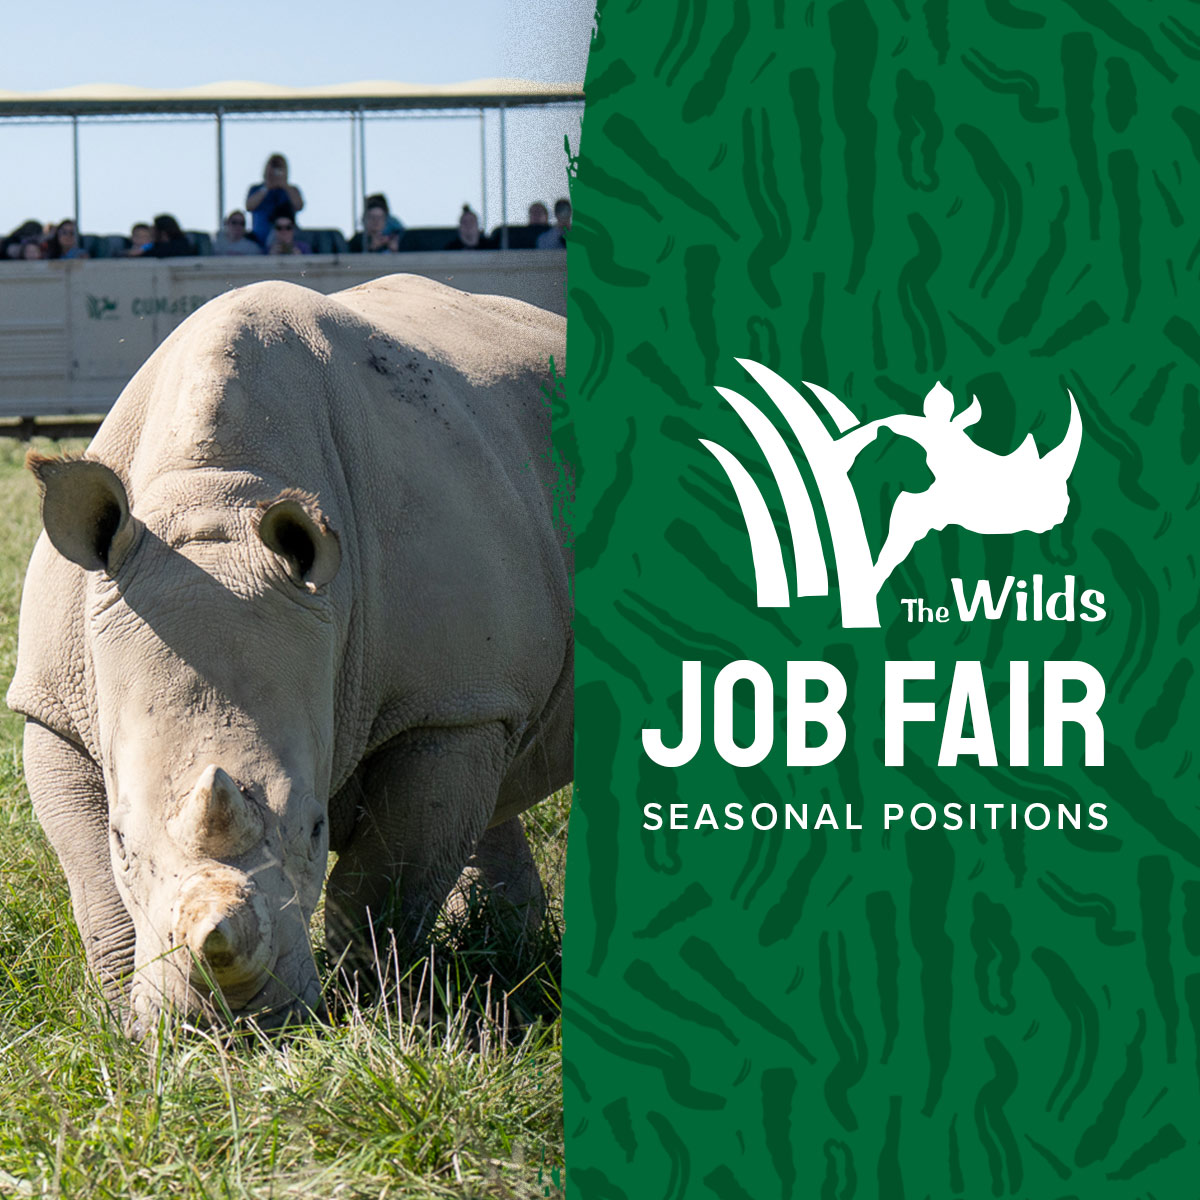 The Wilds' next seasonal job fair is happening on Friday, March 15, from 11 a.m. to 3 p.m. at the Kate Love Simpson Library. While the departments in attendance will vary from fair to fair, stop by and learn more about our seasonal opportunities. thewilds.org/job-fairs